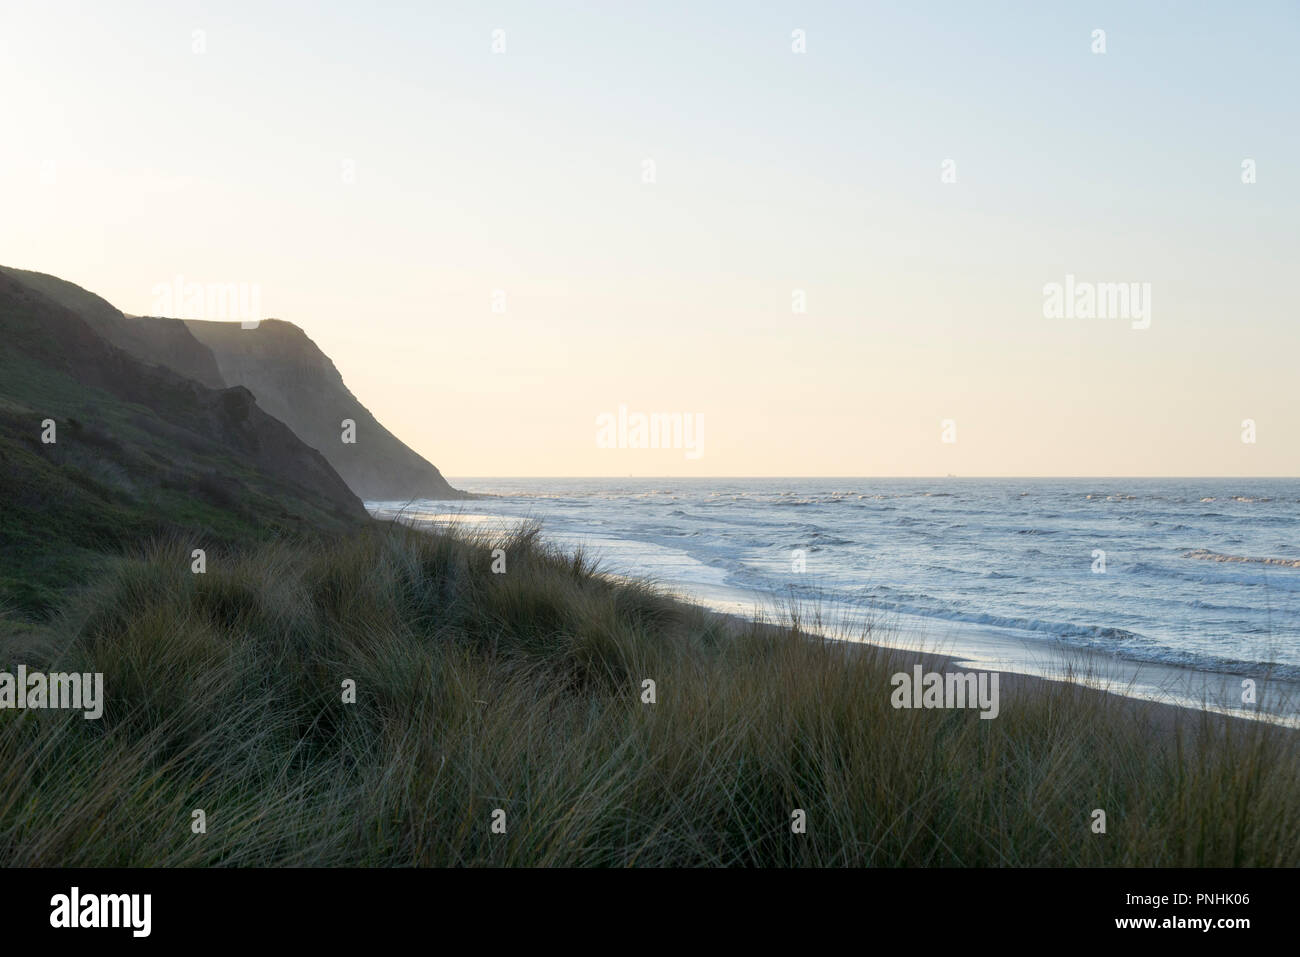 Beautiful evening at Cattersty sands, Skinningrove, North Yorkshire, England. Lovely view from the dunes. Stock Photo